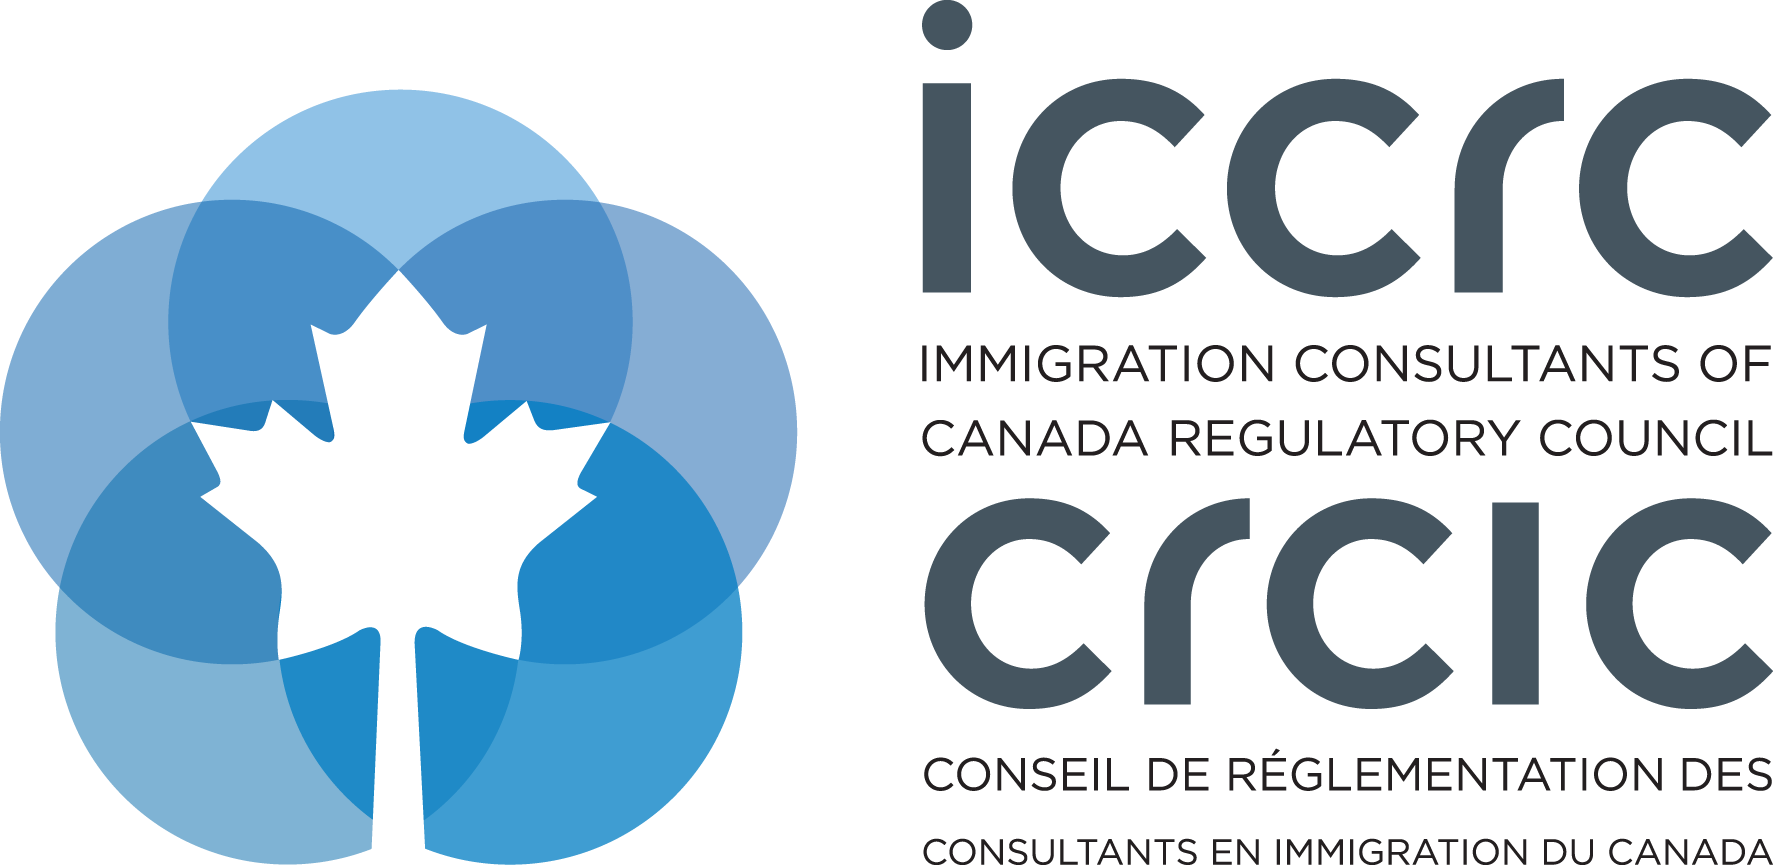 the Immigration Consultants of Canada Regulatory Council (ICCRC).